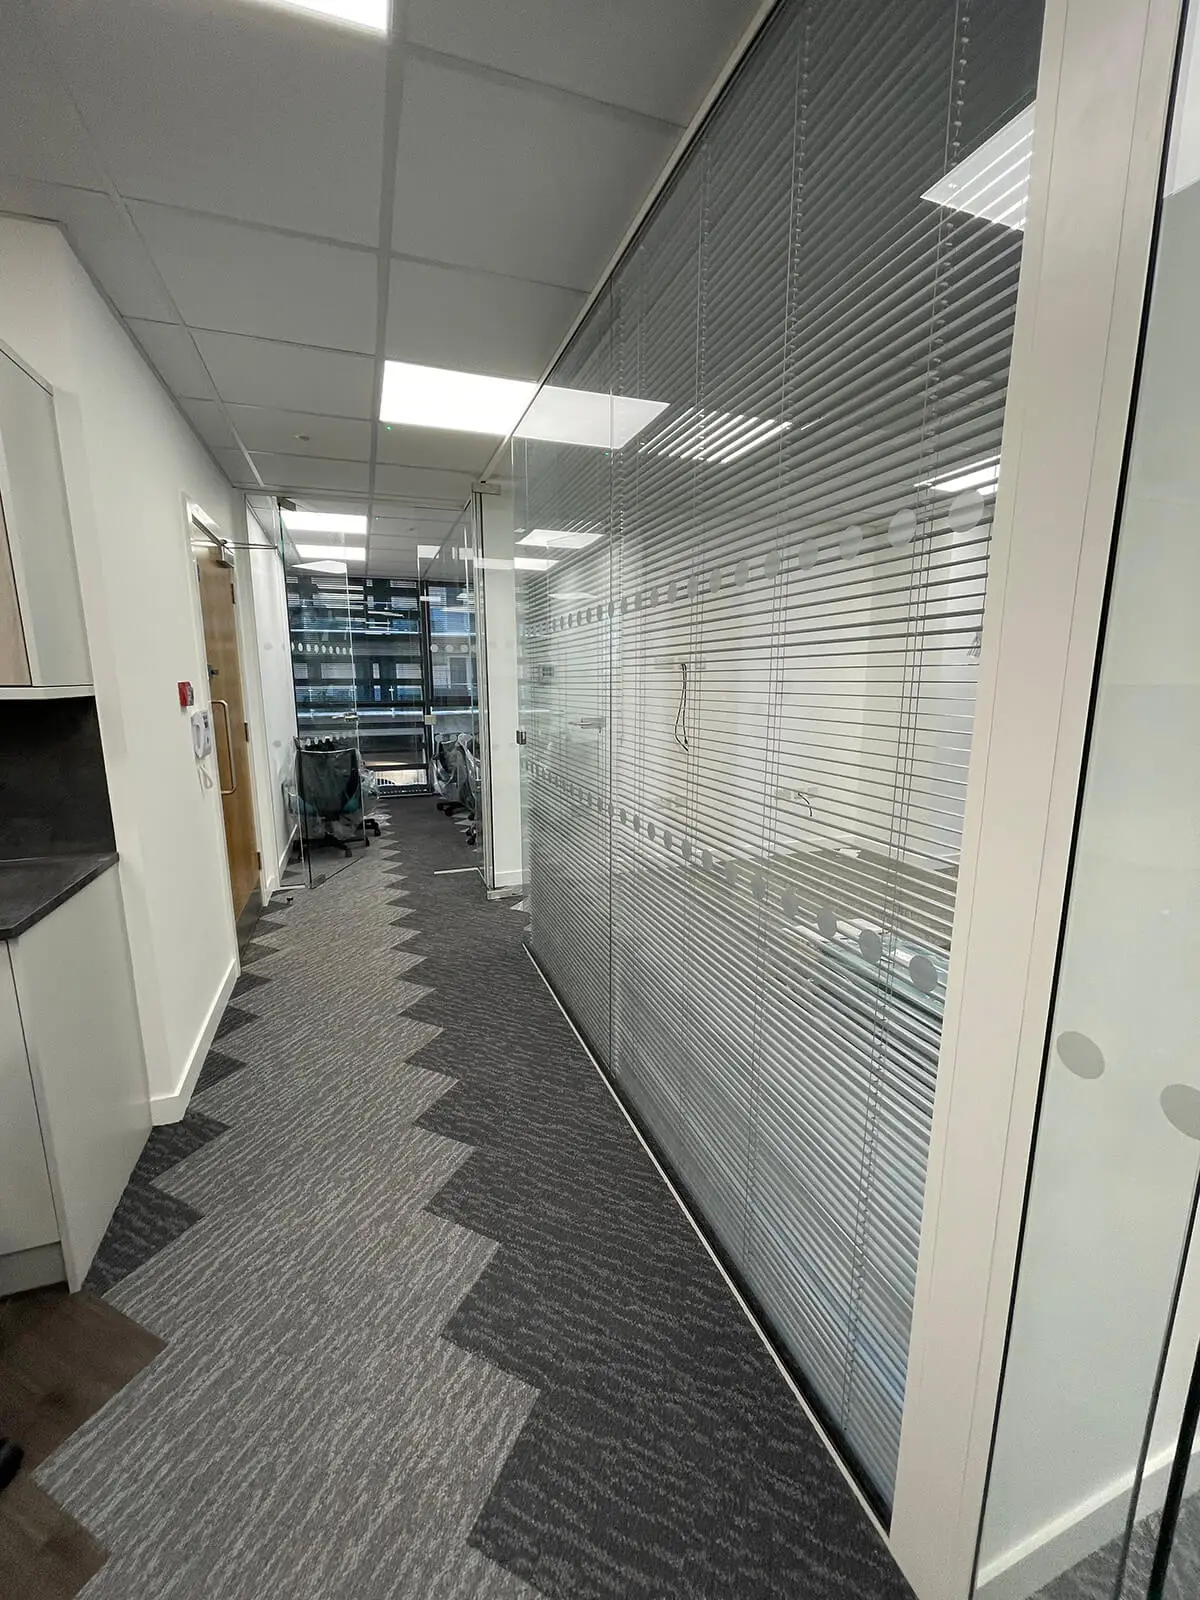 Office space with designer flooring and glass partitioning